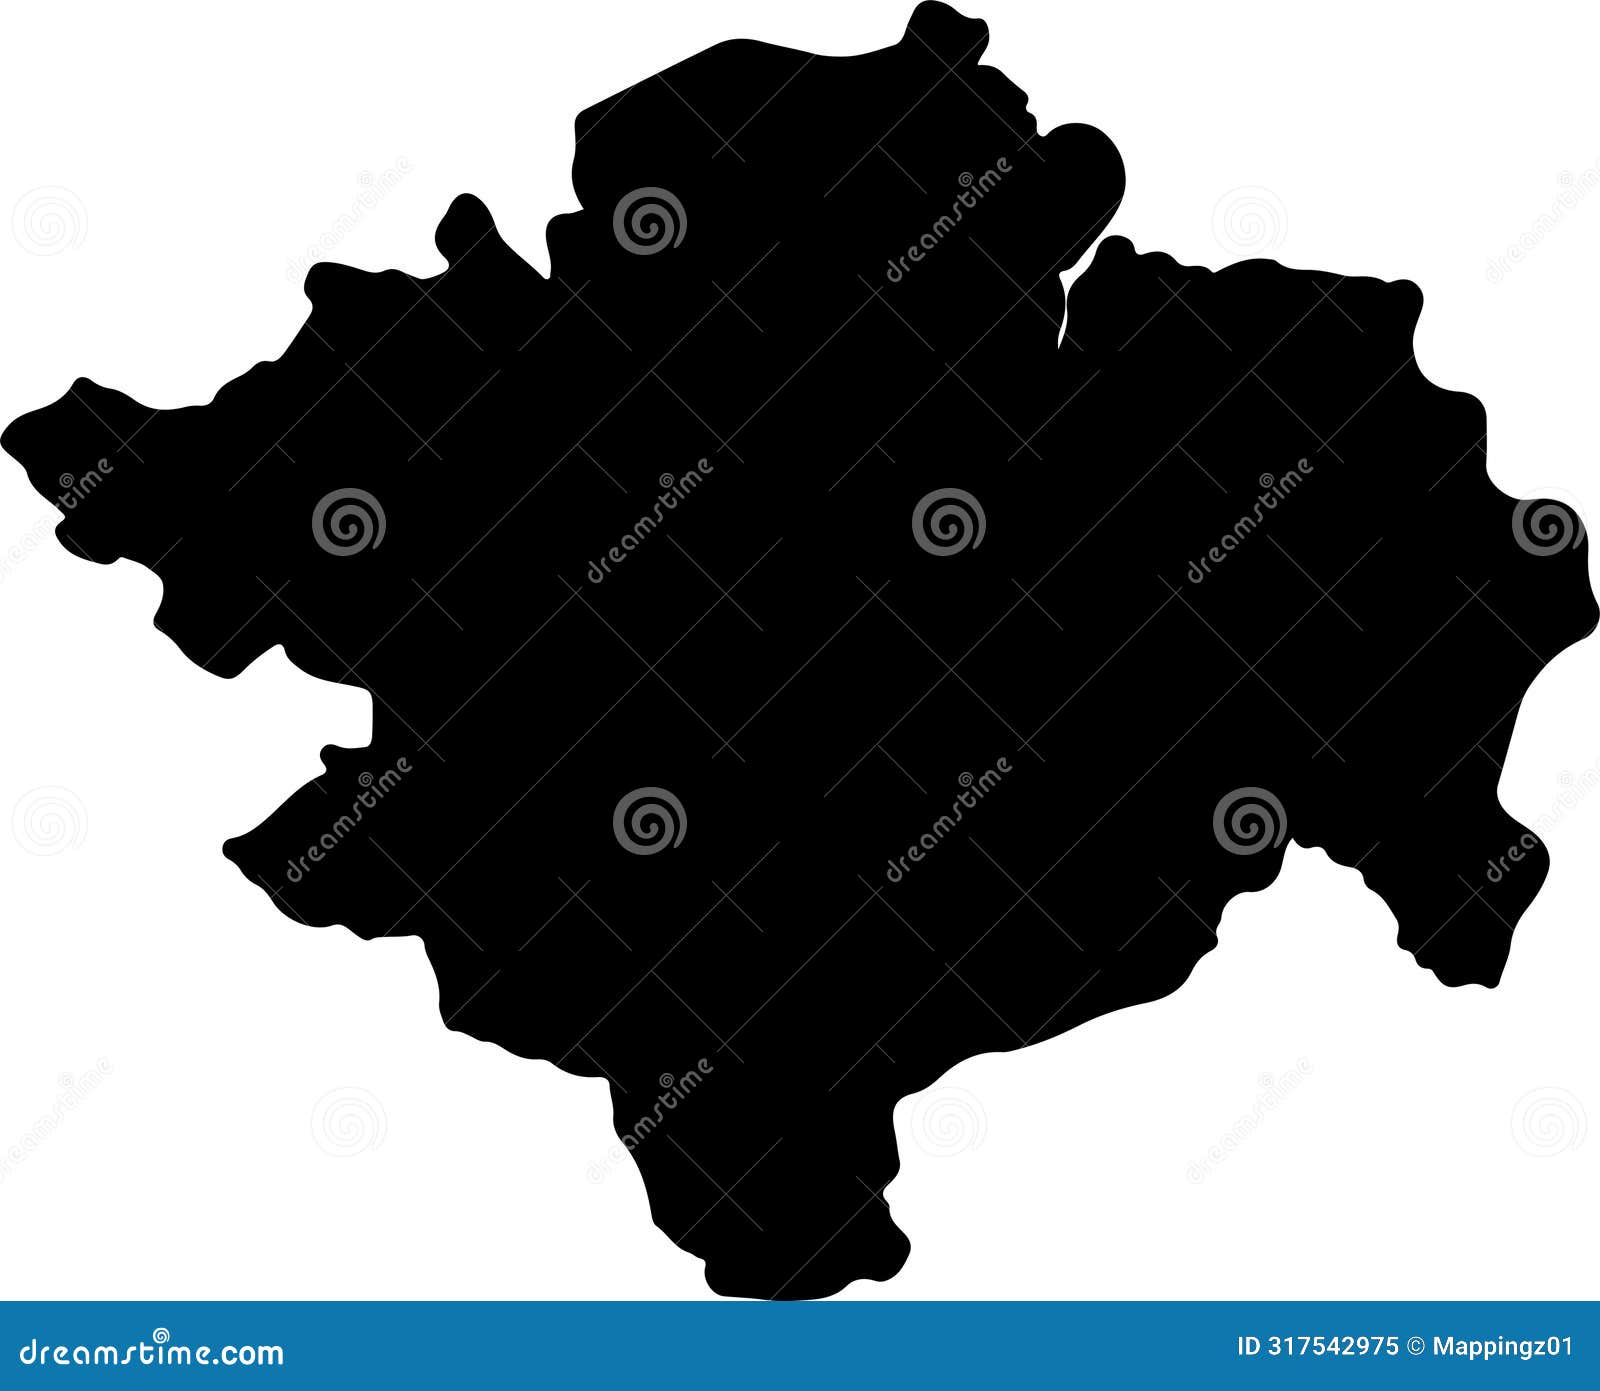 sumatera selatan indonesia silhouette map with transparent background